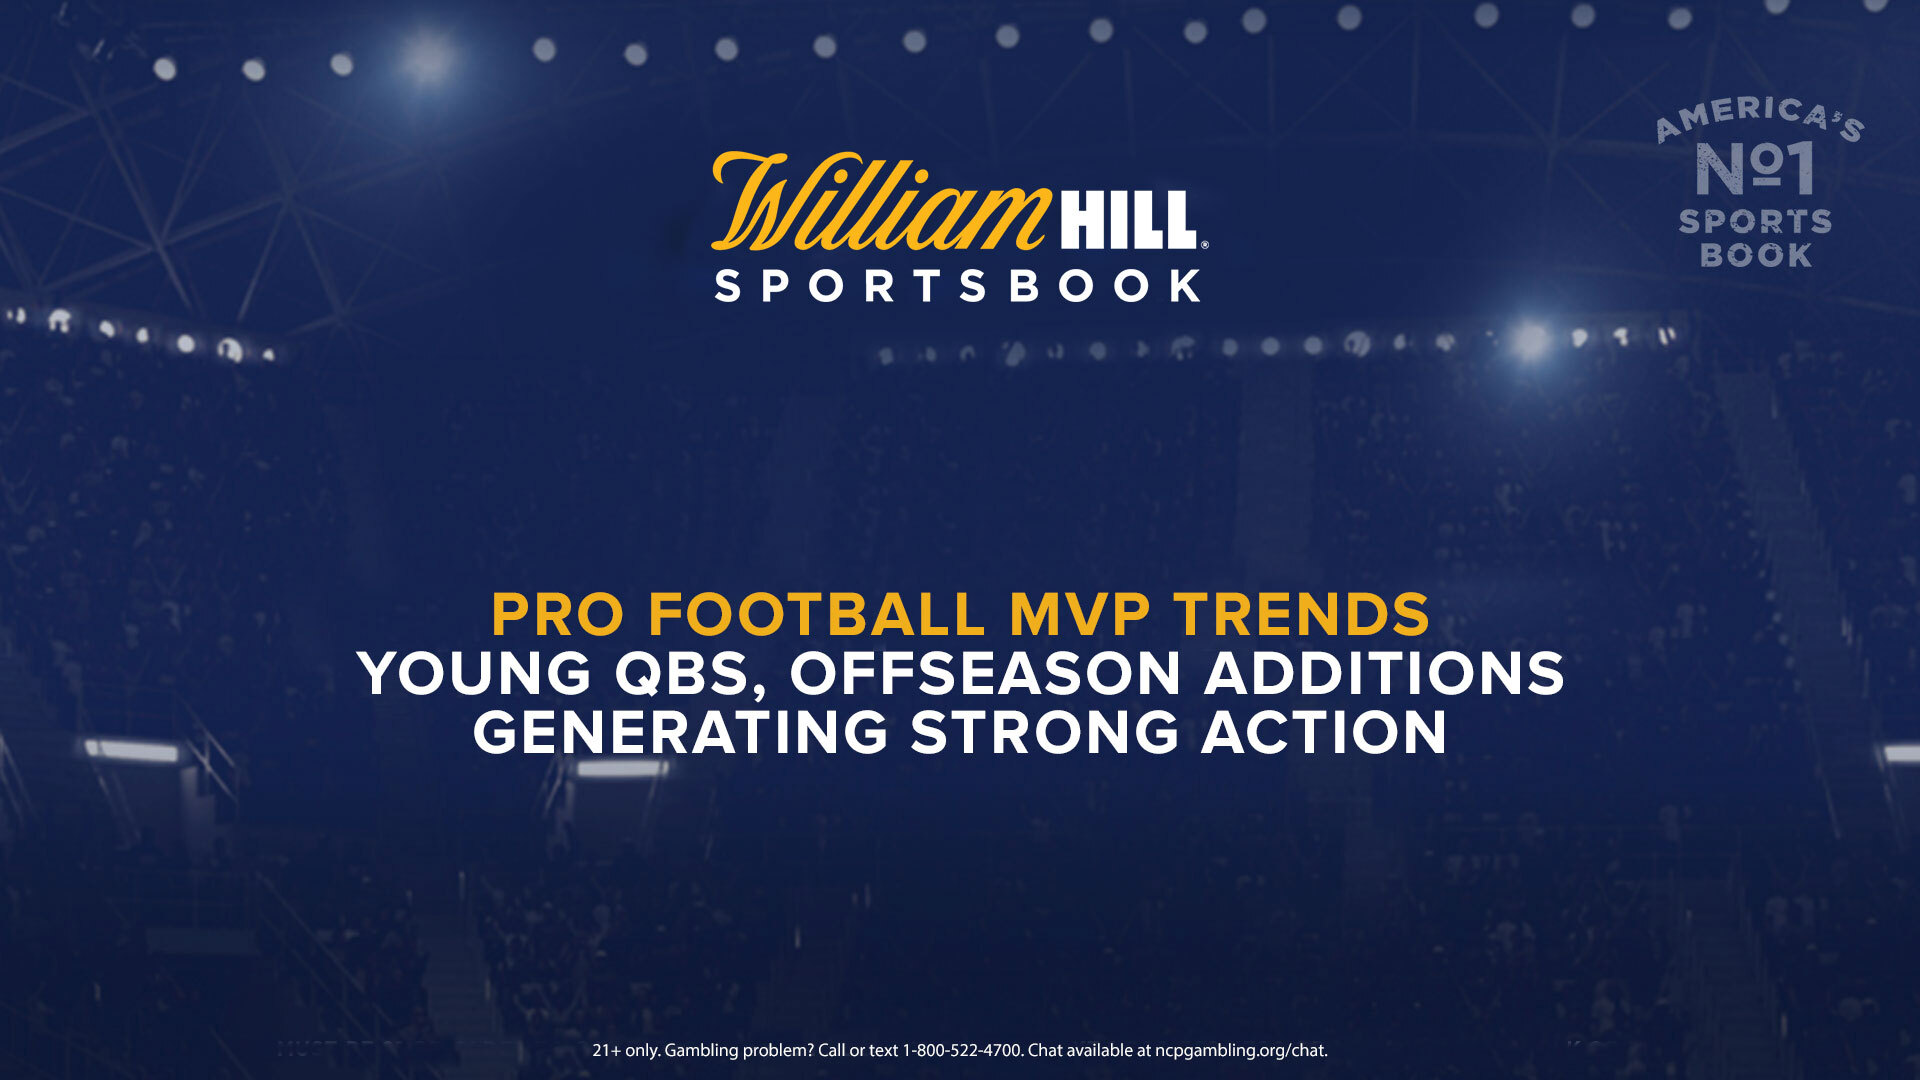 Pro Football MVP Trends: Young QBs, Offseason Additions Generating